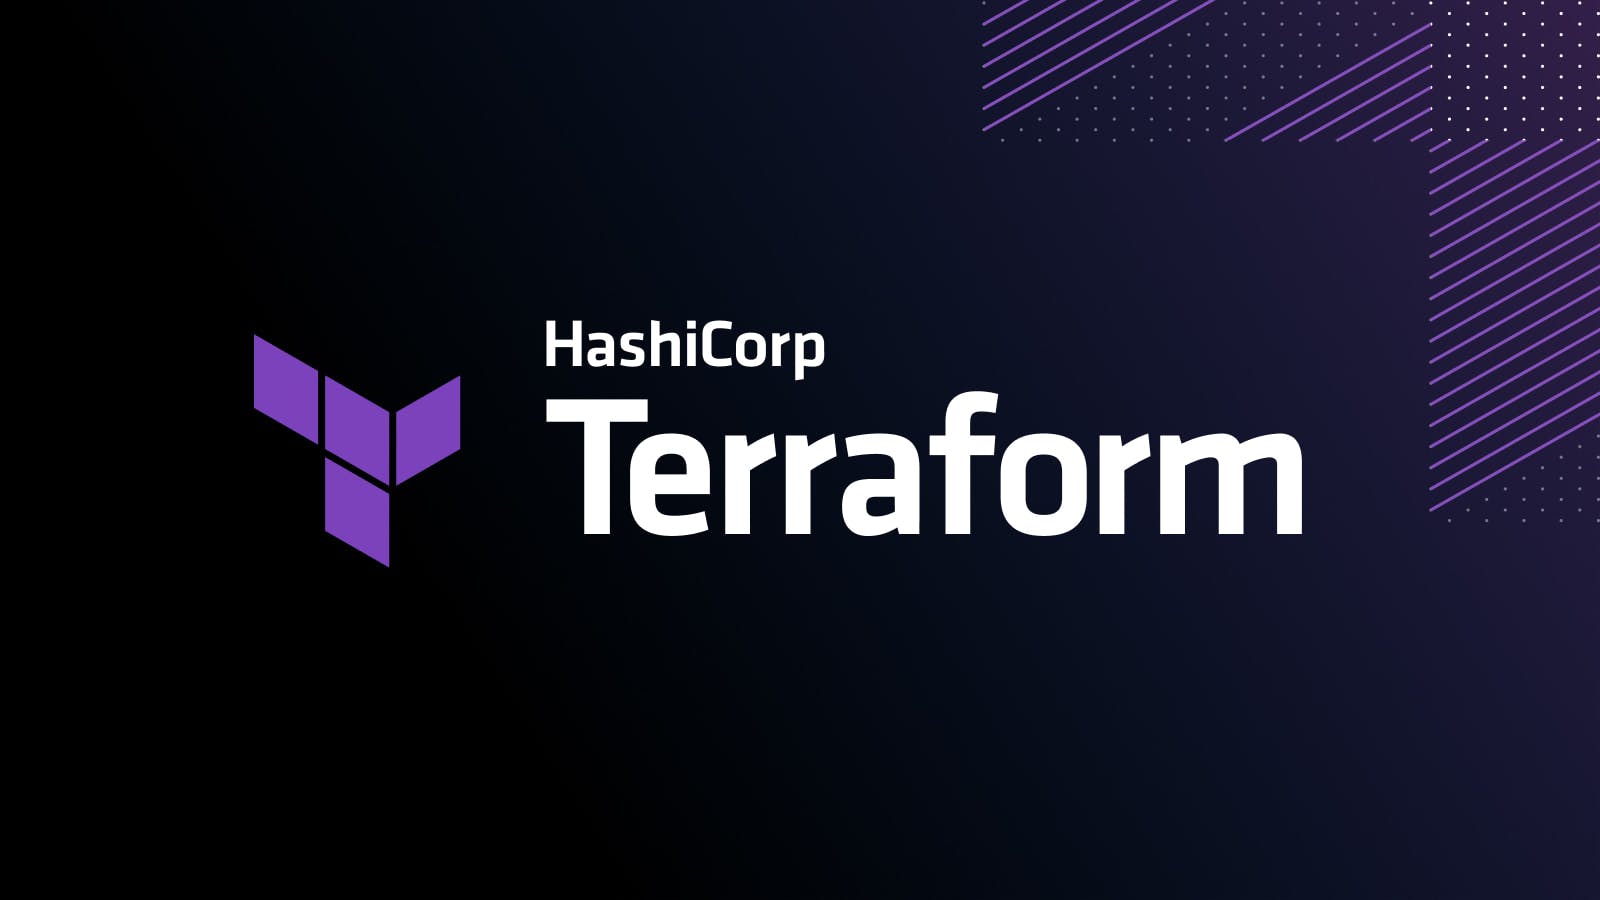 HashiCorp releases a new CI/CD pipeline integration tool and templates for Terraform Cloud